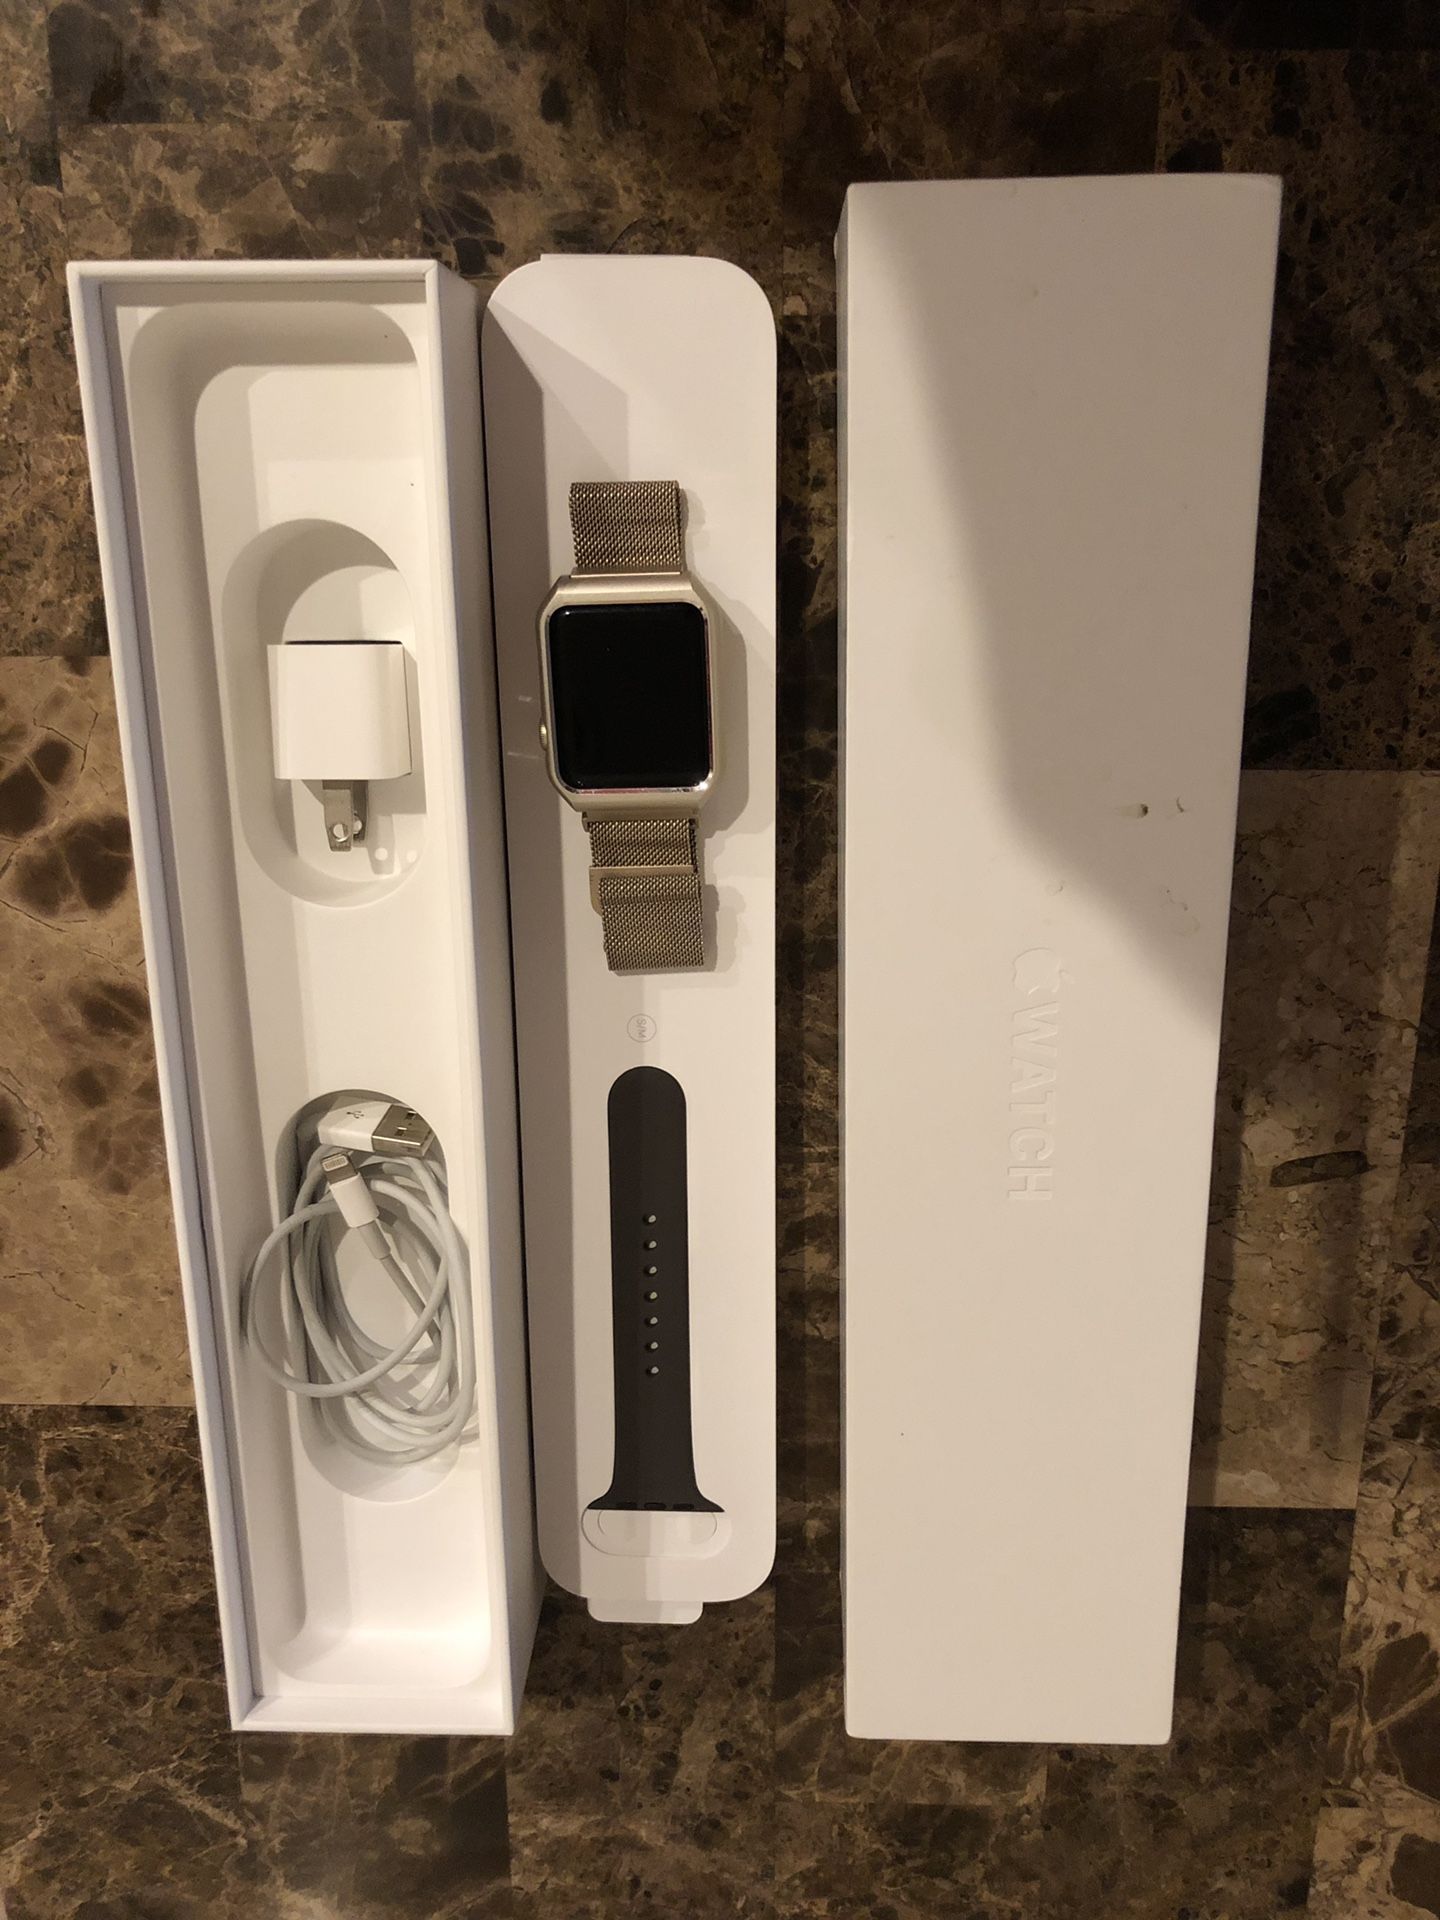 Apple Watch 3 series Not using anymore